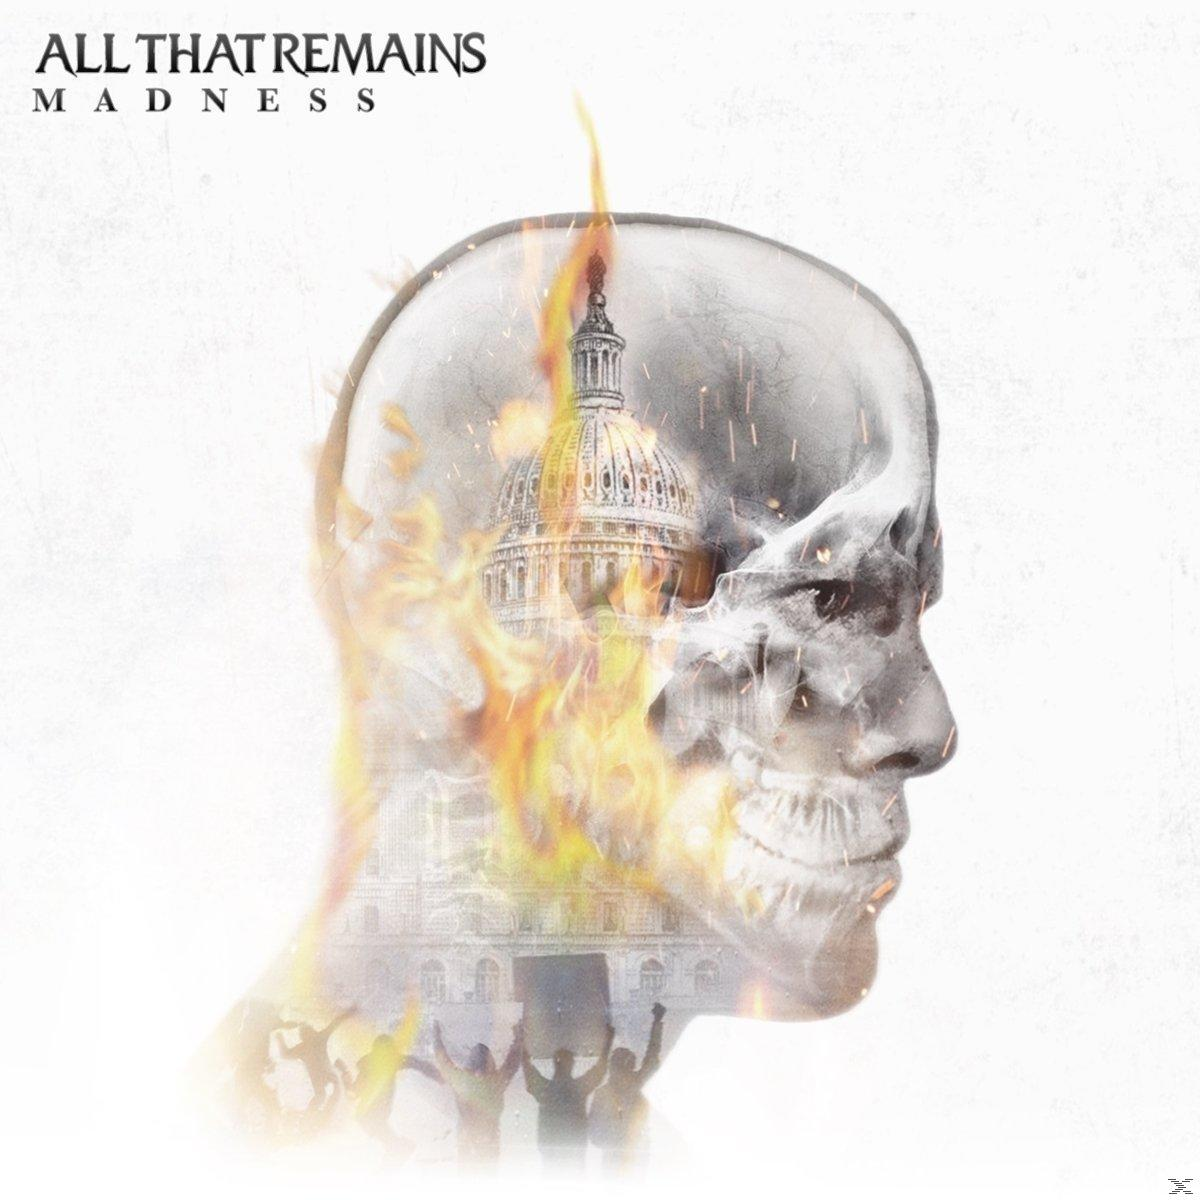 All That (CD) - Madness Remains 